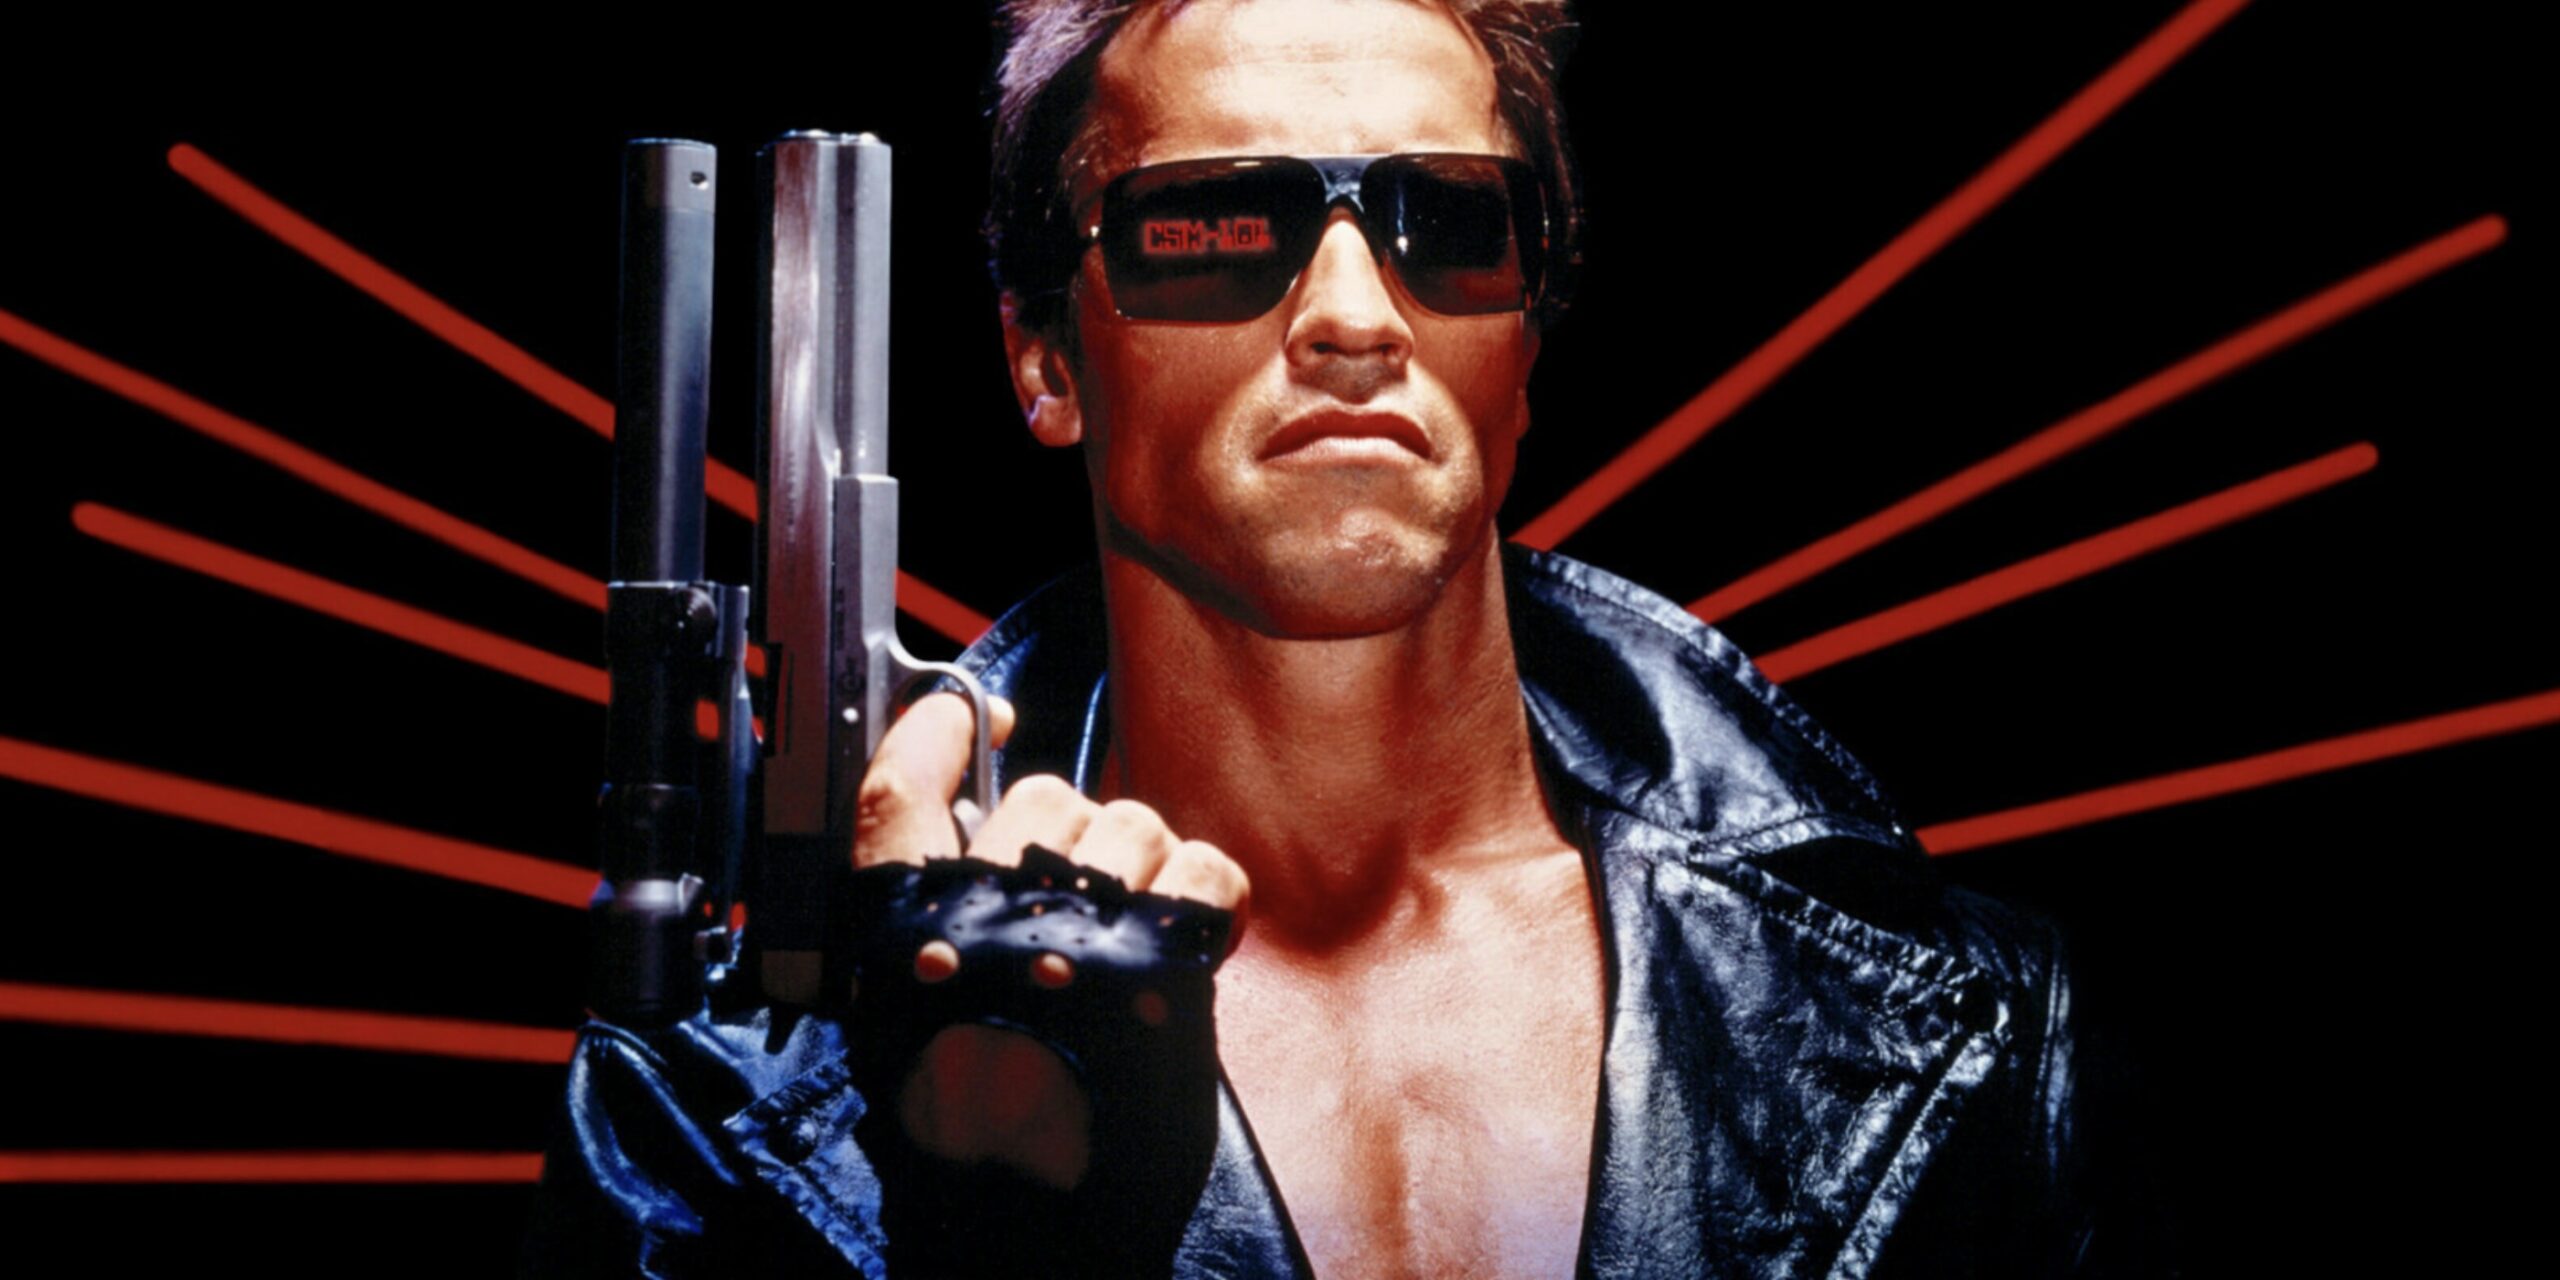 An Anime Adaptation of Terminator Has Been Officially Confirmed To Be In The Works